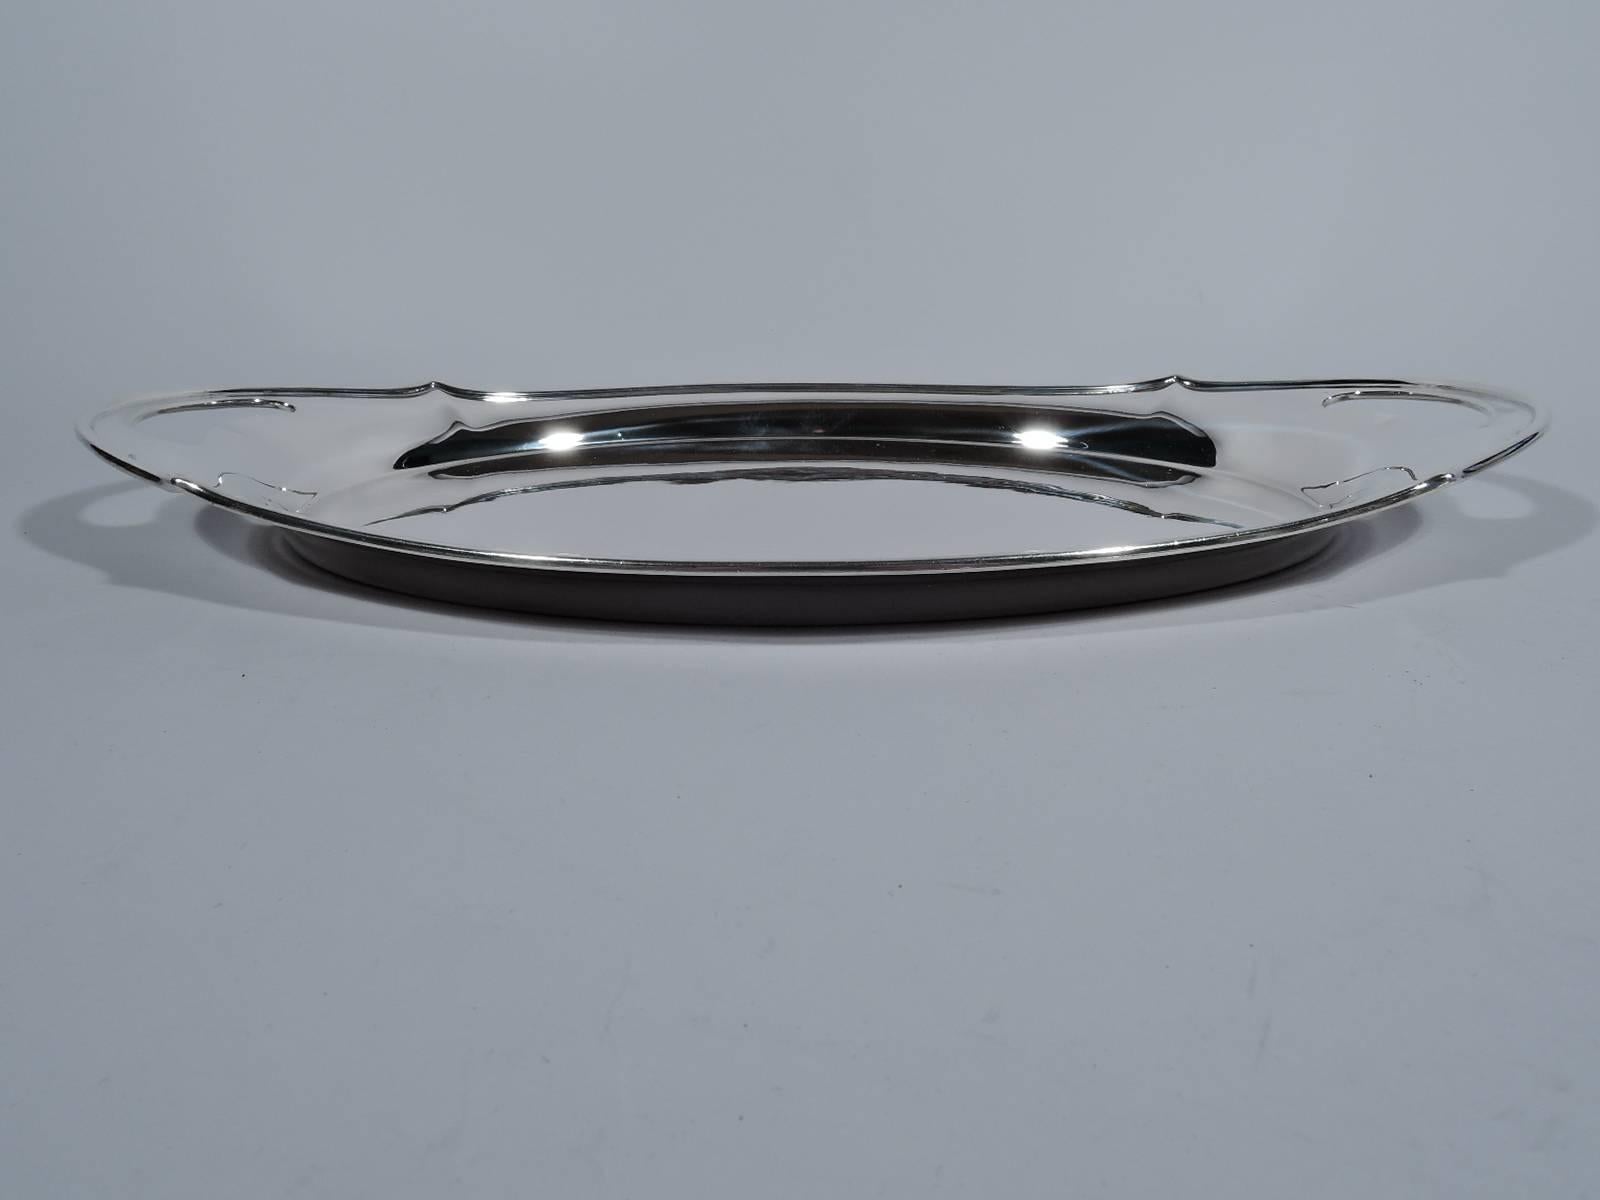 Sterling silver serving tray in Plymouth pattern. Made by Gorham in Providence in 1910. Oval well, tapering sides, and shaped rim. Cut-out kidney handles at ends. Perfect for a drinks party. Hallmark includes date symbol, no. A4609, and retailer’s